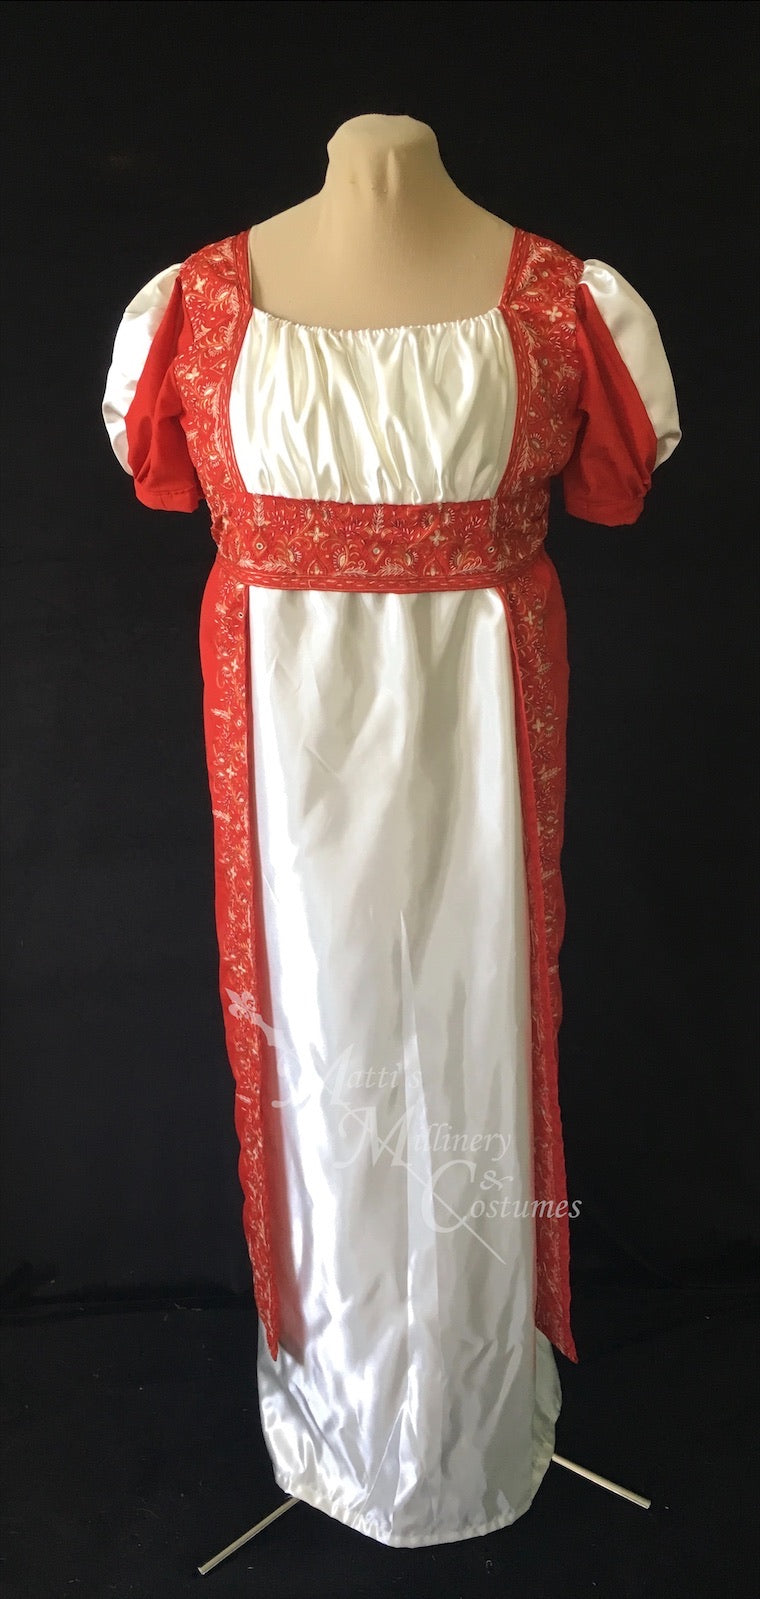 Madeline Regency Ball Dress in red silk embroidered sari and ivory satin